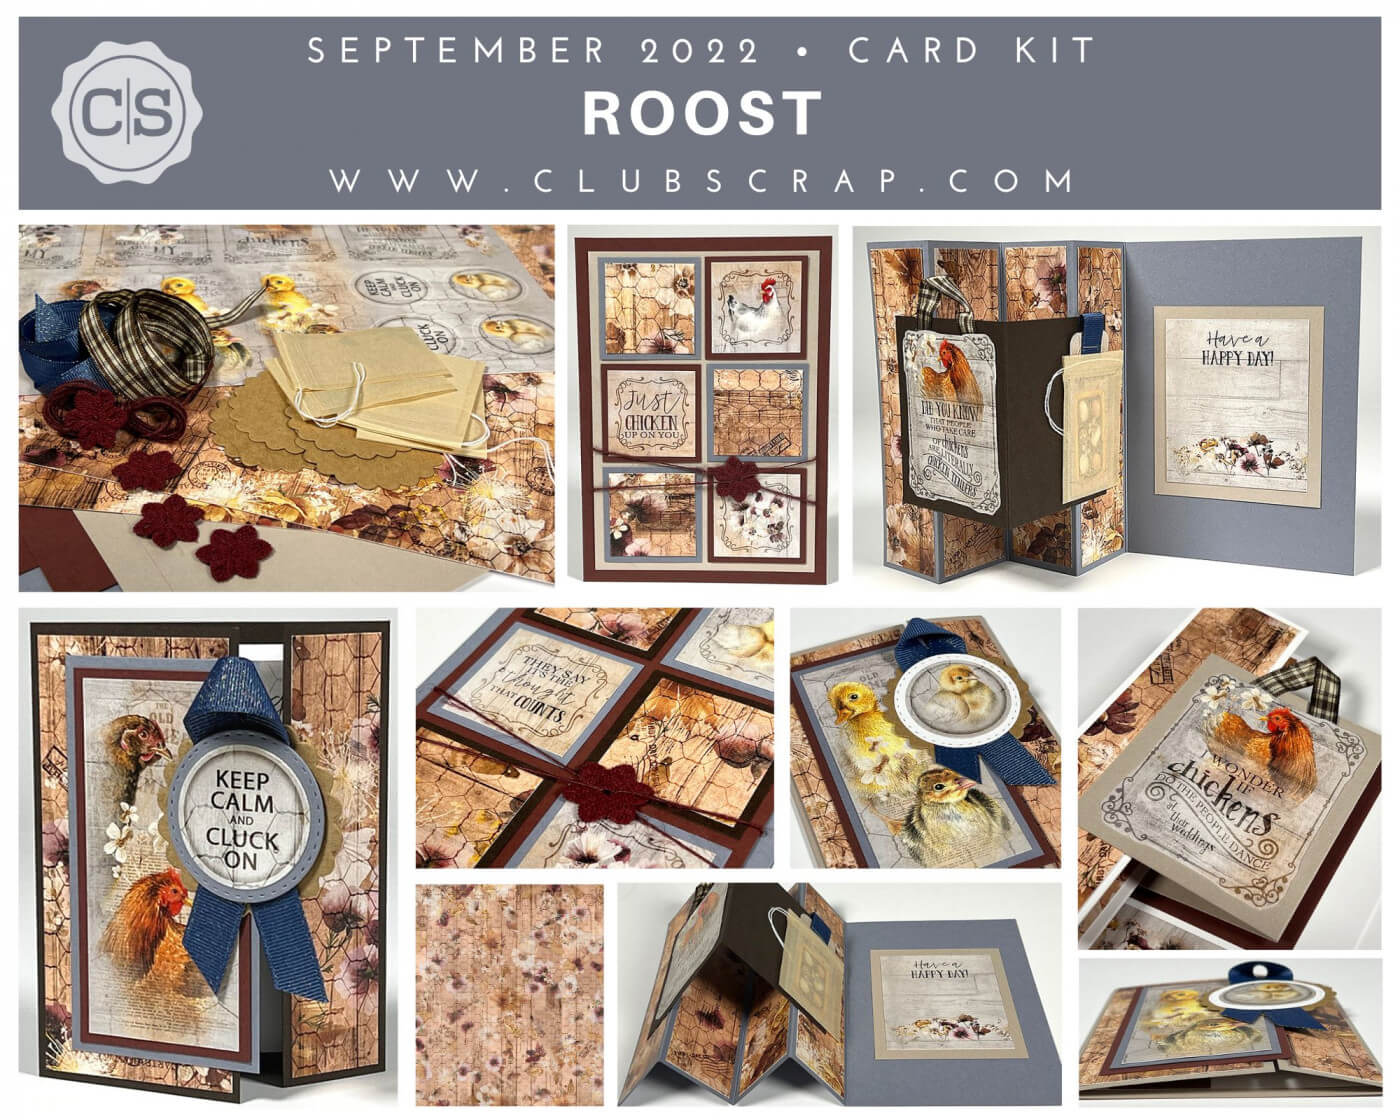 Roost Spoiler - Card Kit  by Club Scrap #clubscrap